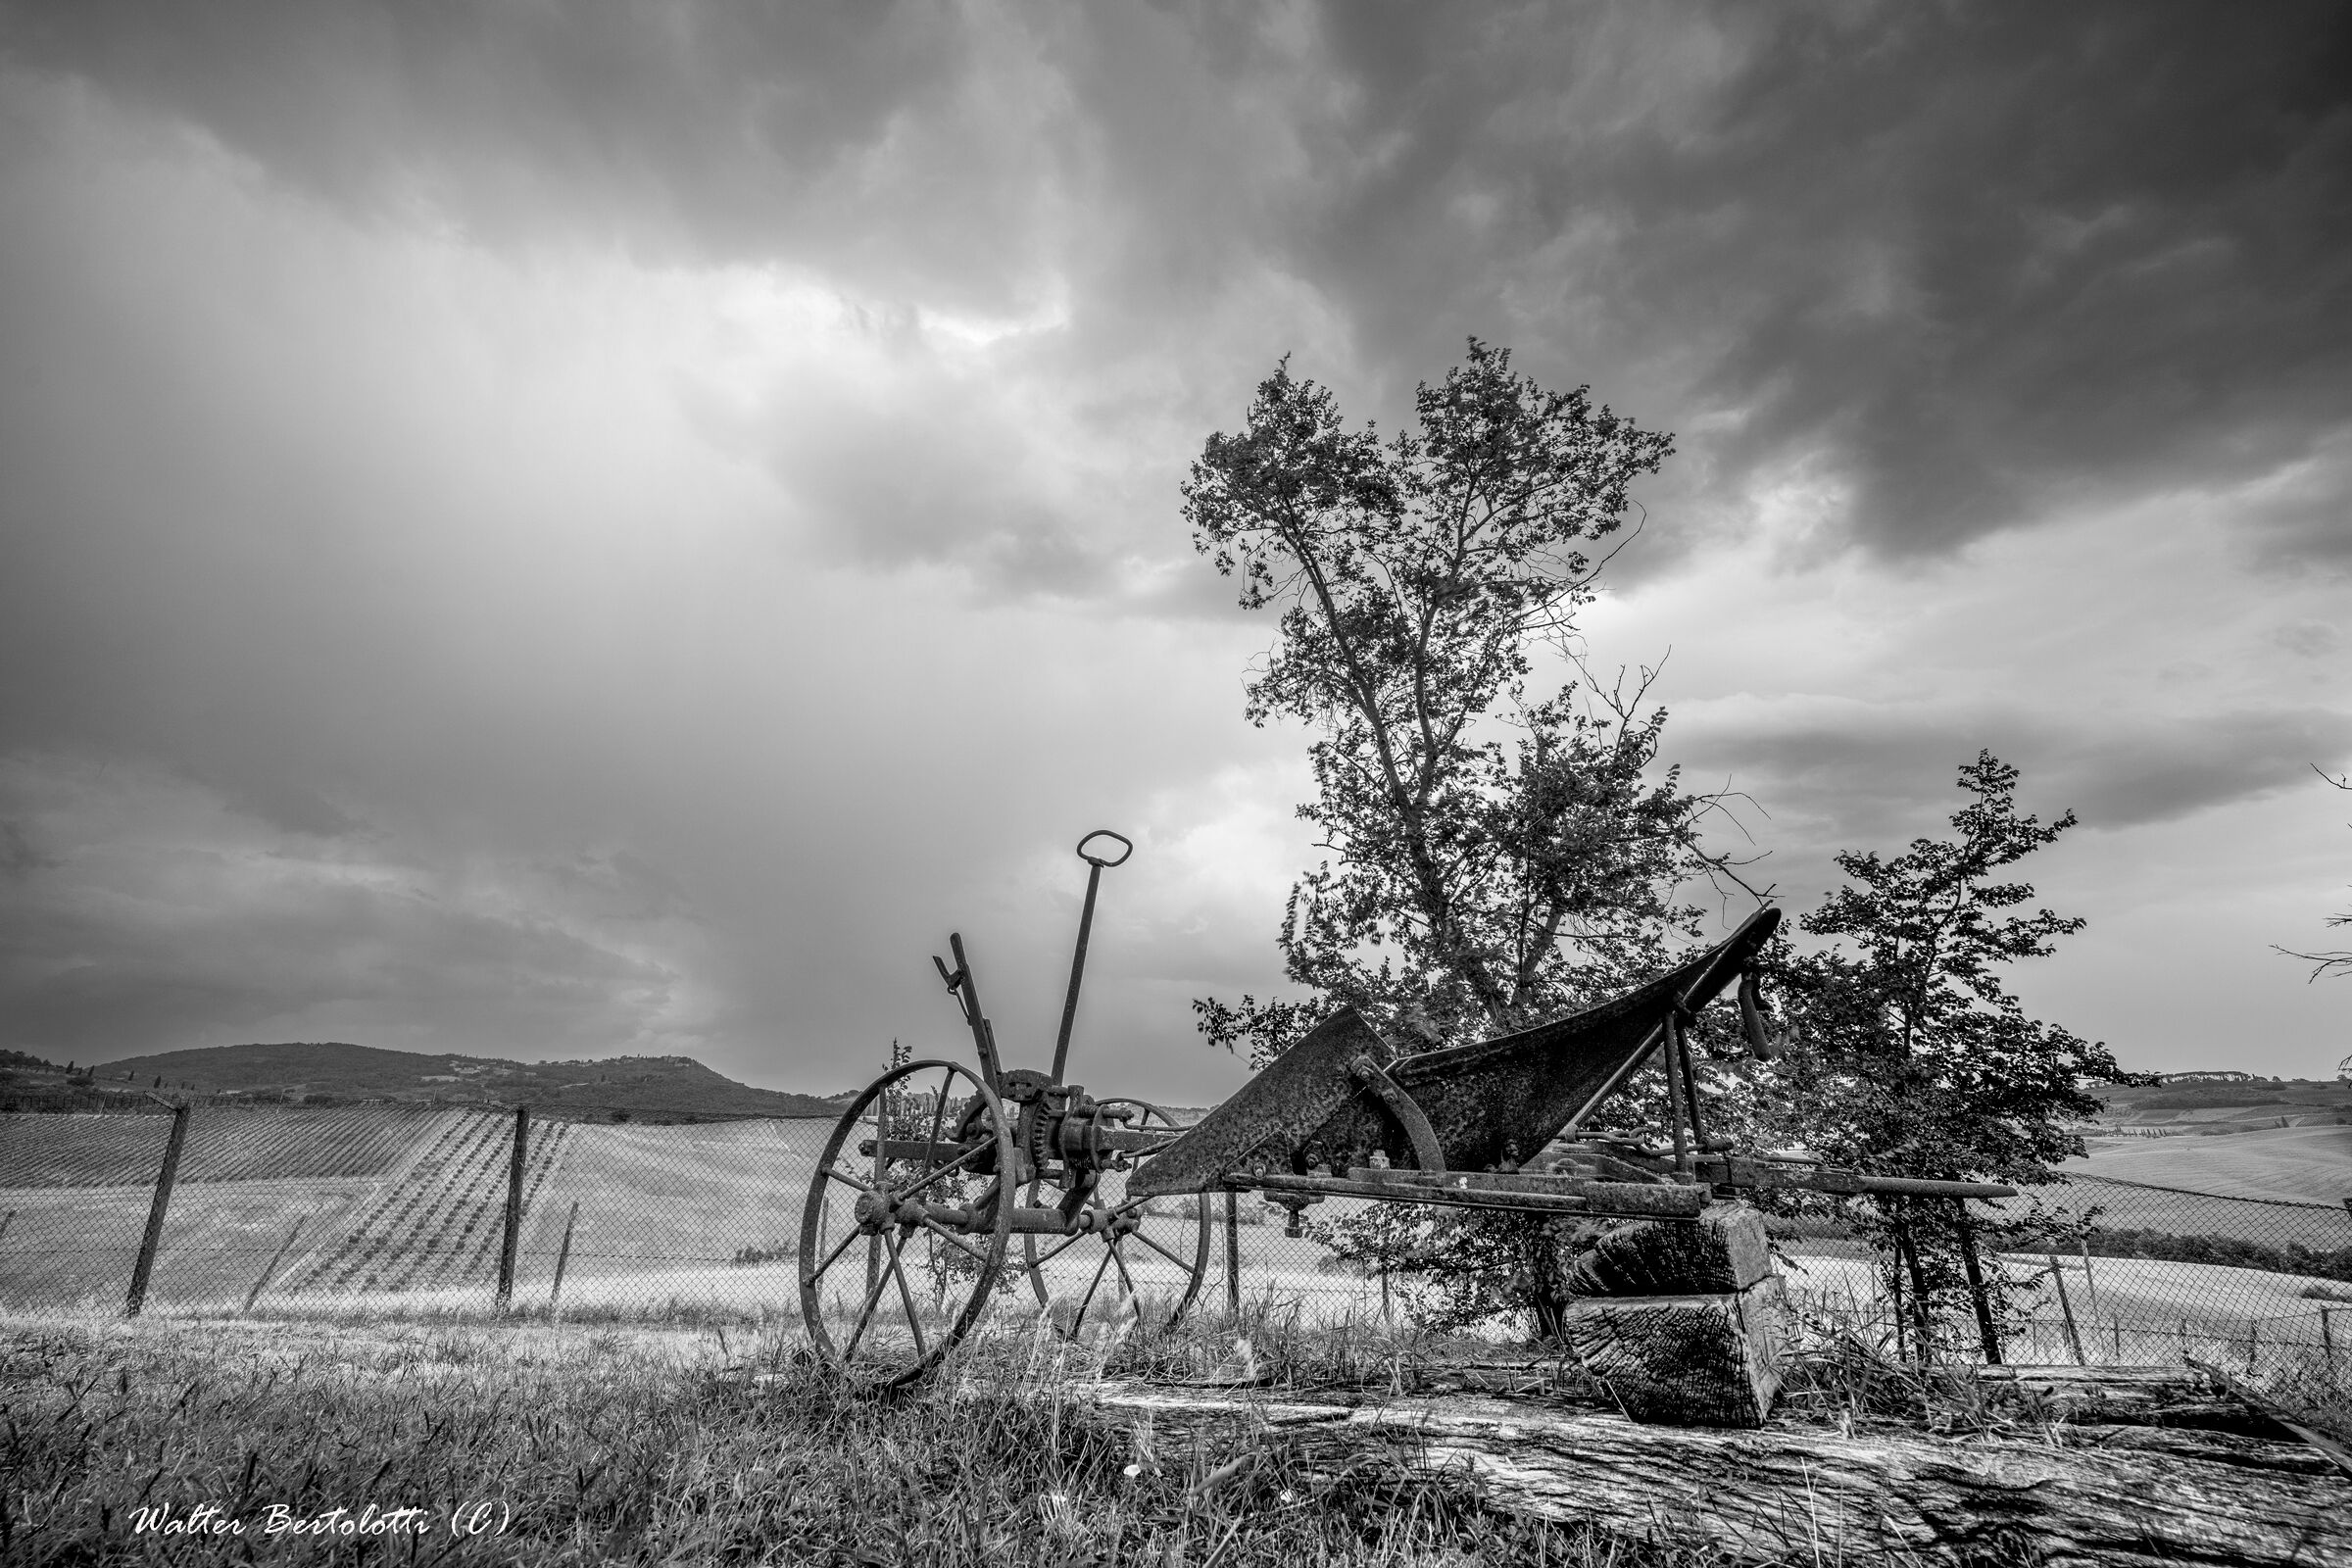 the old plow in black and white...